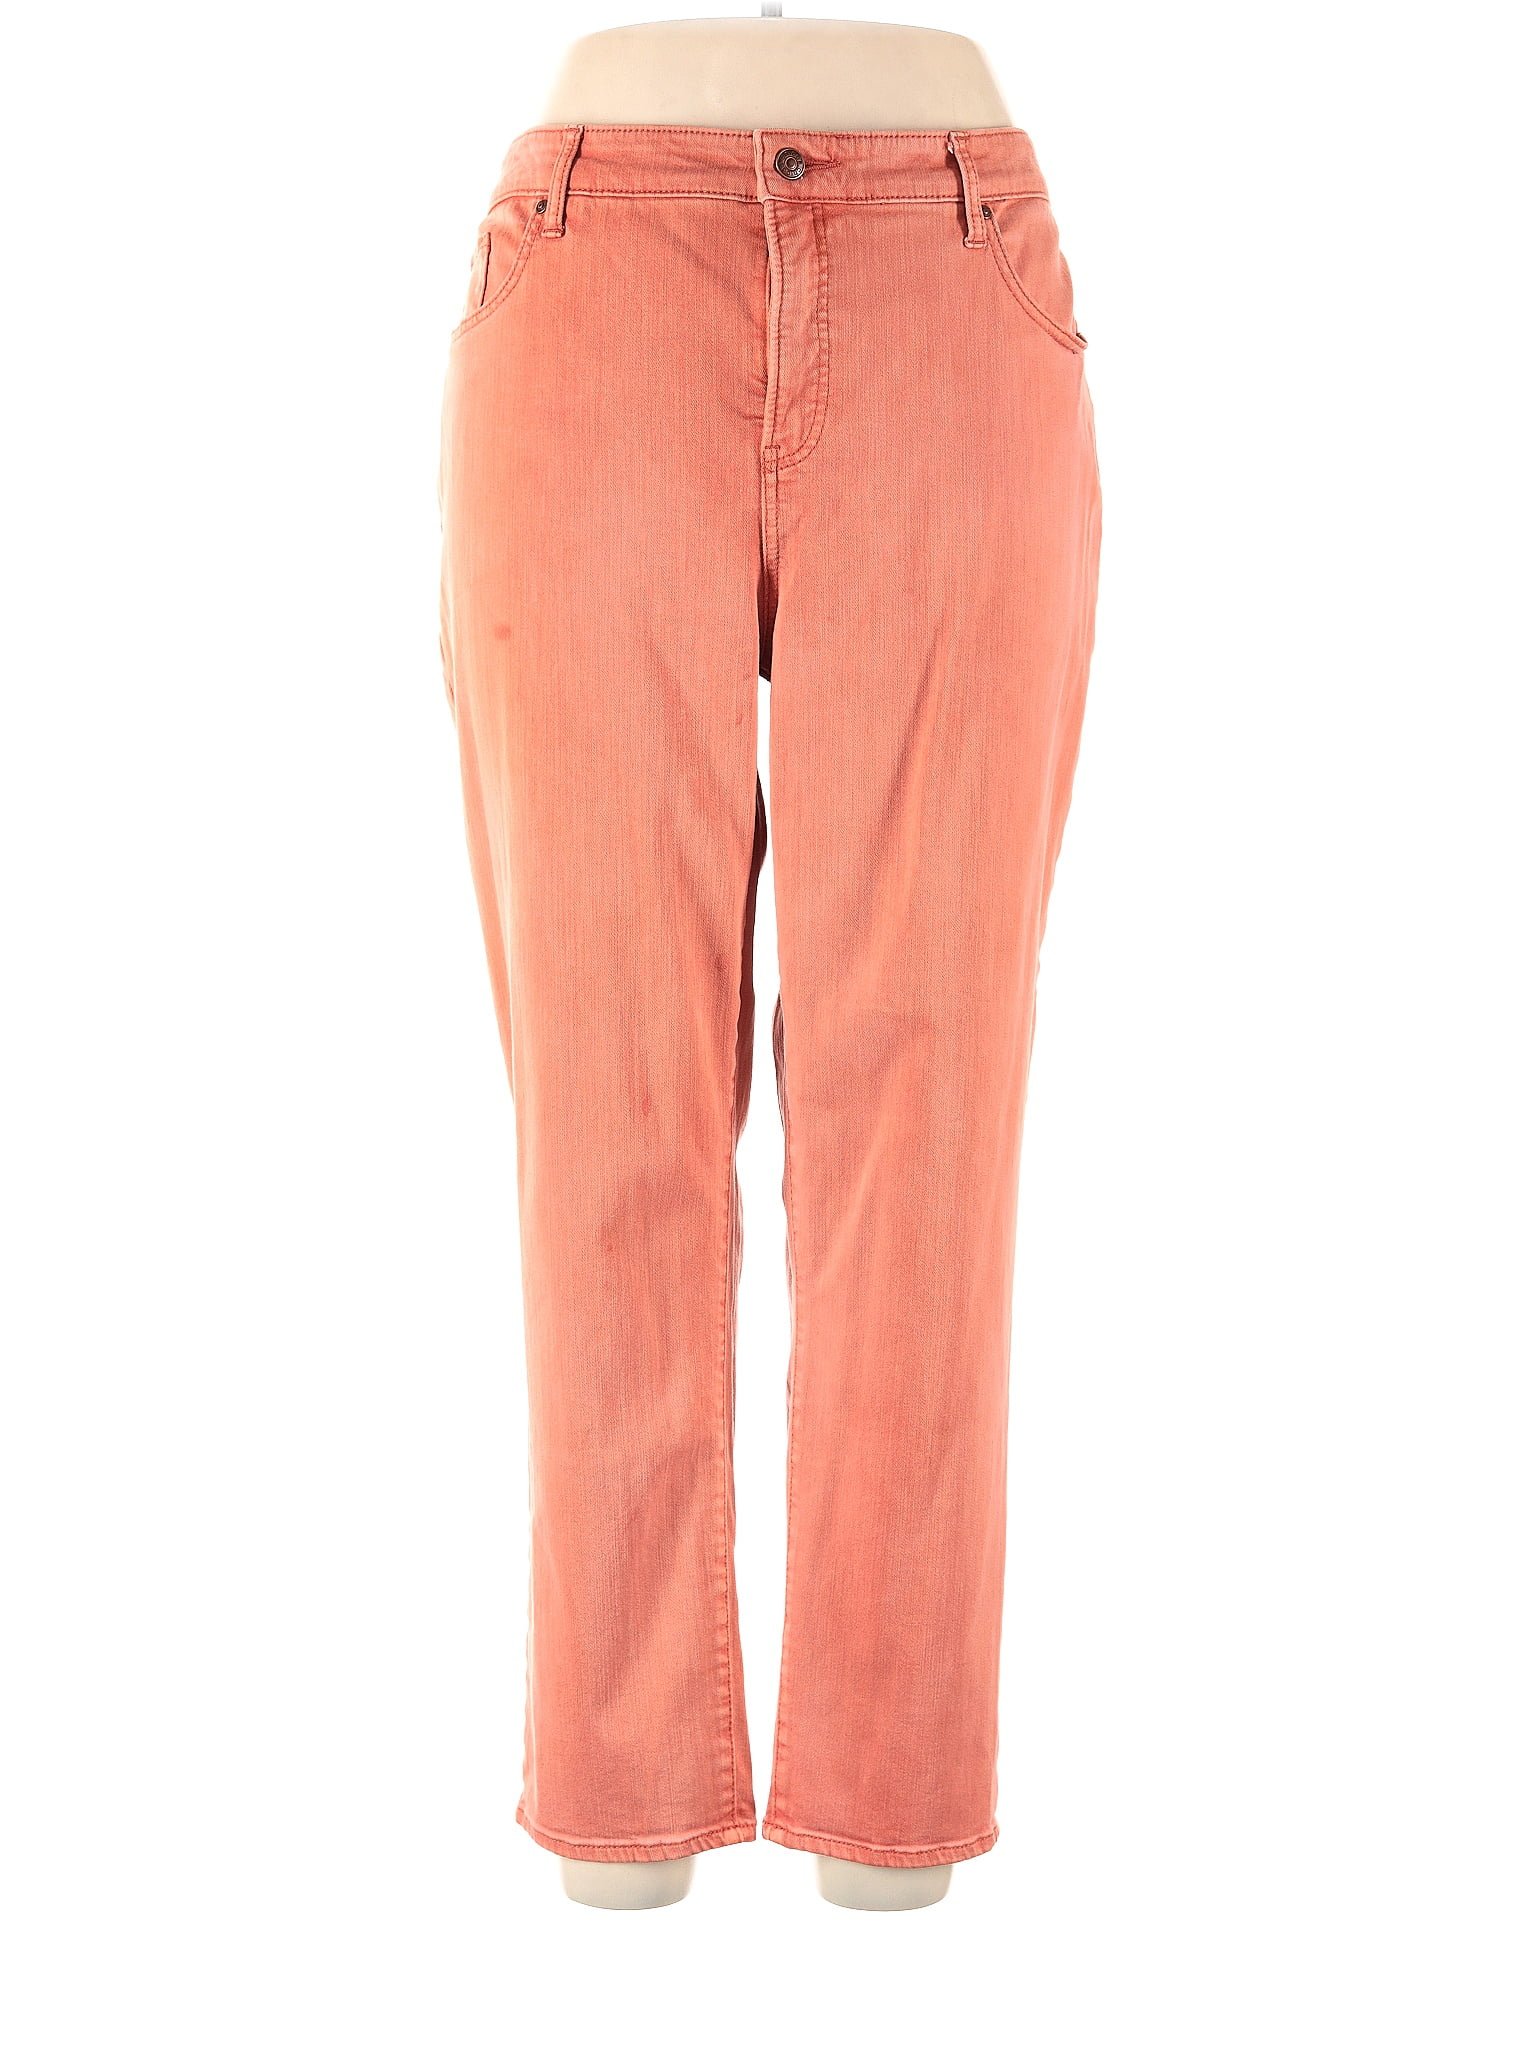 So Slimming by Chico's Solid Pink Orange Jeans Size XL (3) - 72